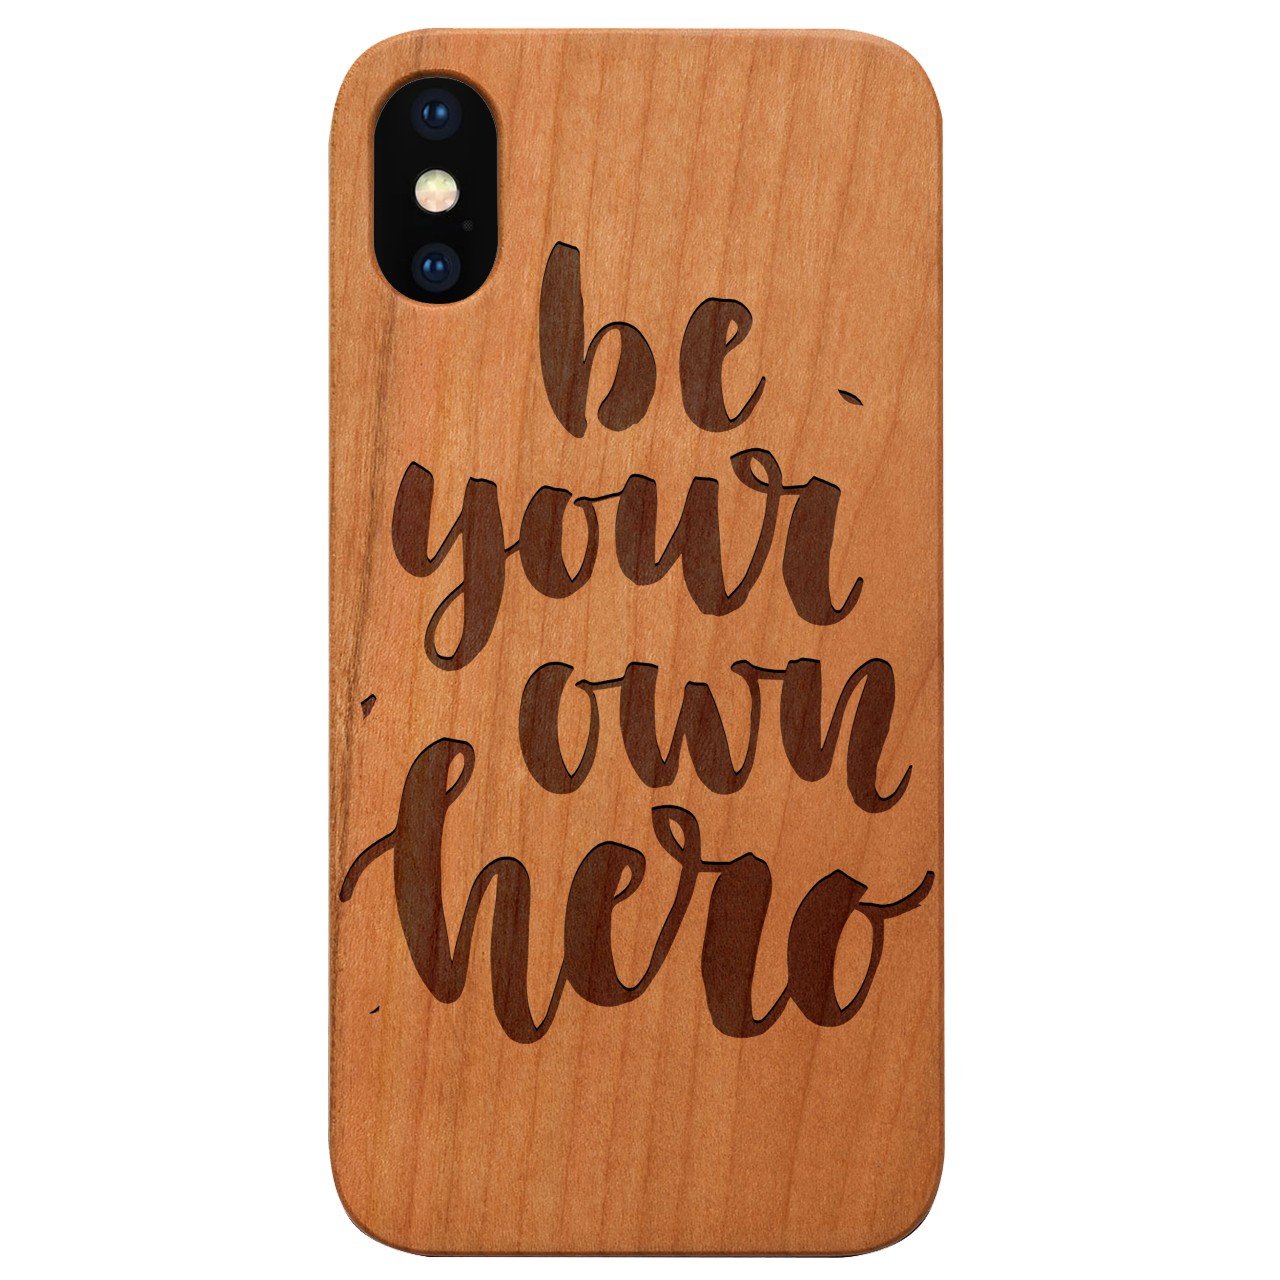 Be Your Own Hero - Engraved - Wooden Phone Case